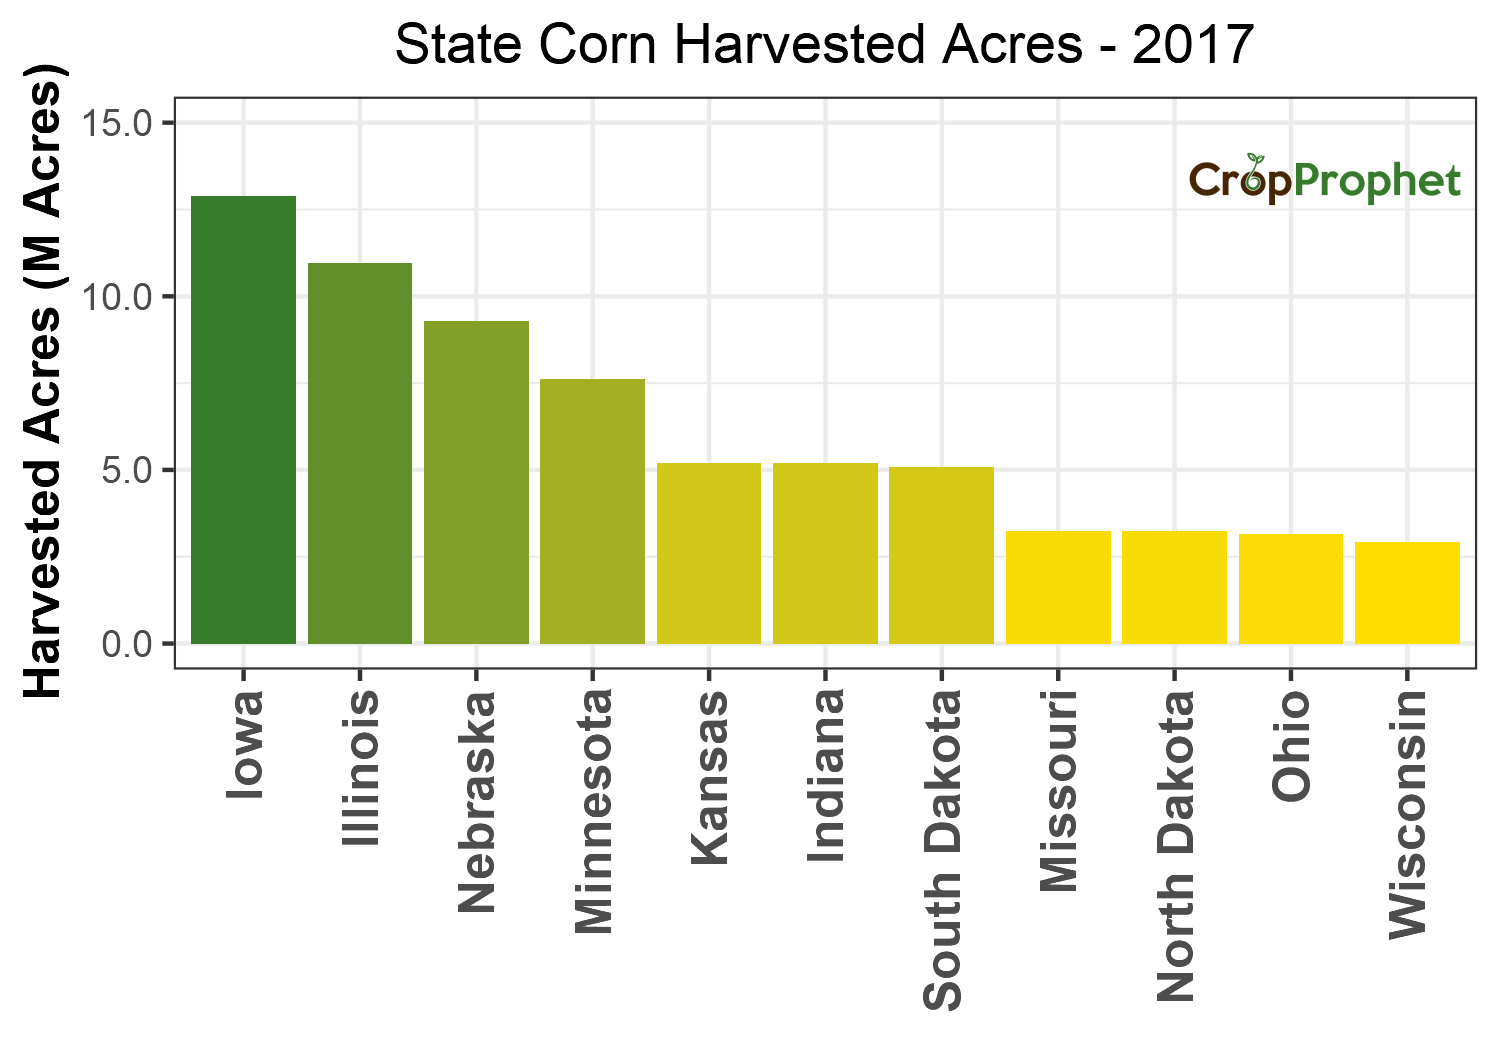 Corn Harvested Acres by State - 2017 Rankings